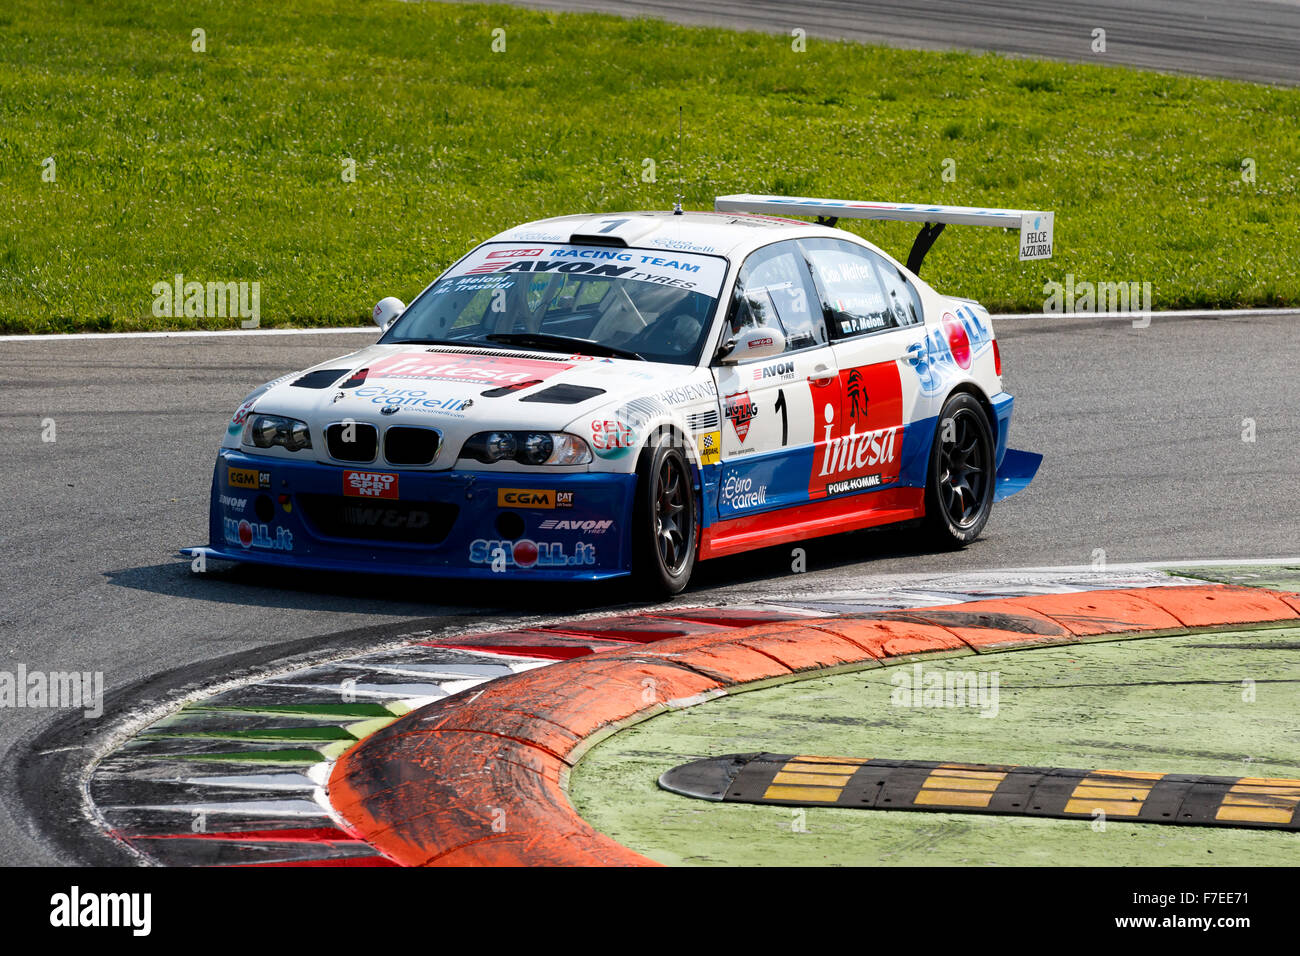 Monza, Italy - May 30, 2015: BMW M3 E46 of W&D RACING TEAM team, driven by MELONI Paolo - TRESOLDI Massimiliano during the C.I. Turismo Endurance - Race in Autodromo Nazionale di Monza Circuit on May 30, 2015 in Monza, Italy. Stock Photo